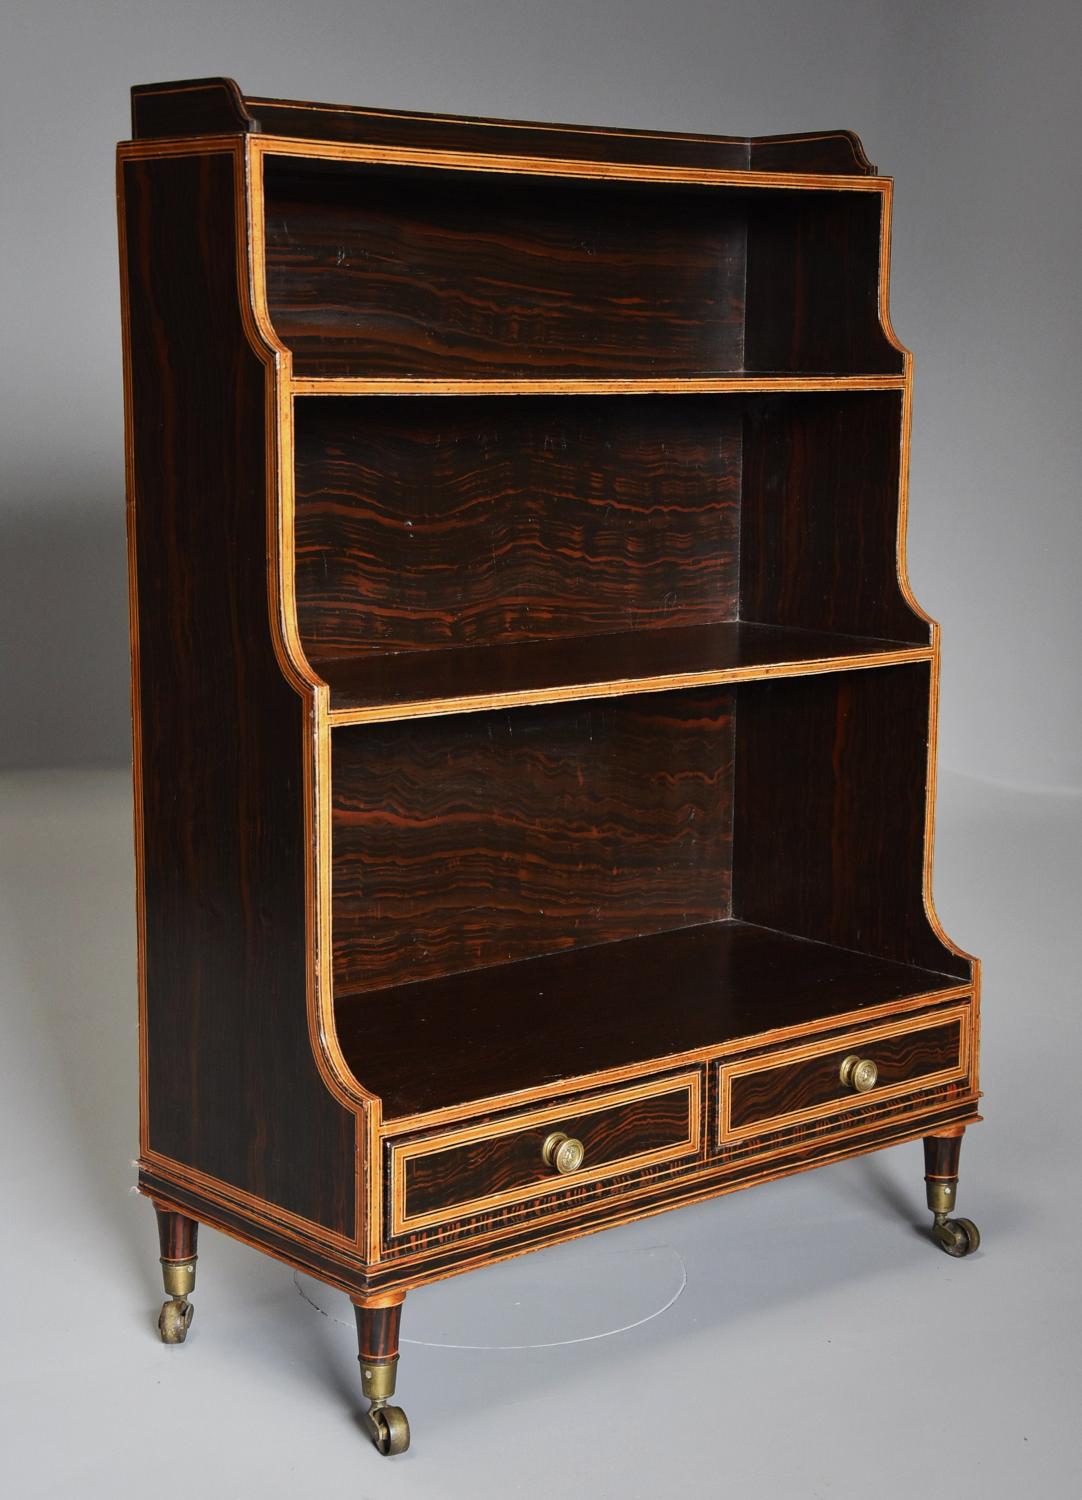 Early 19th century Regency simulated rosewood waterfall bookcase